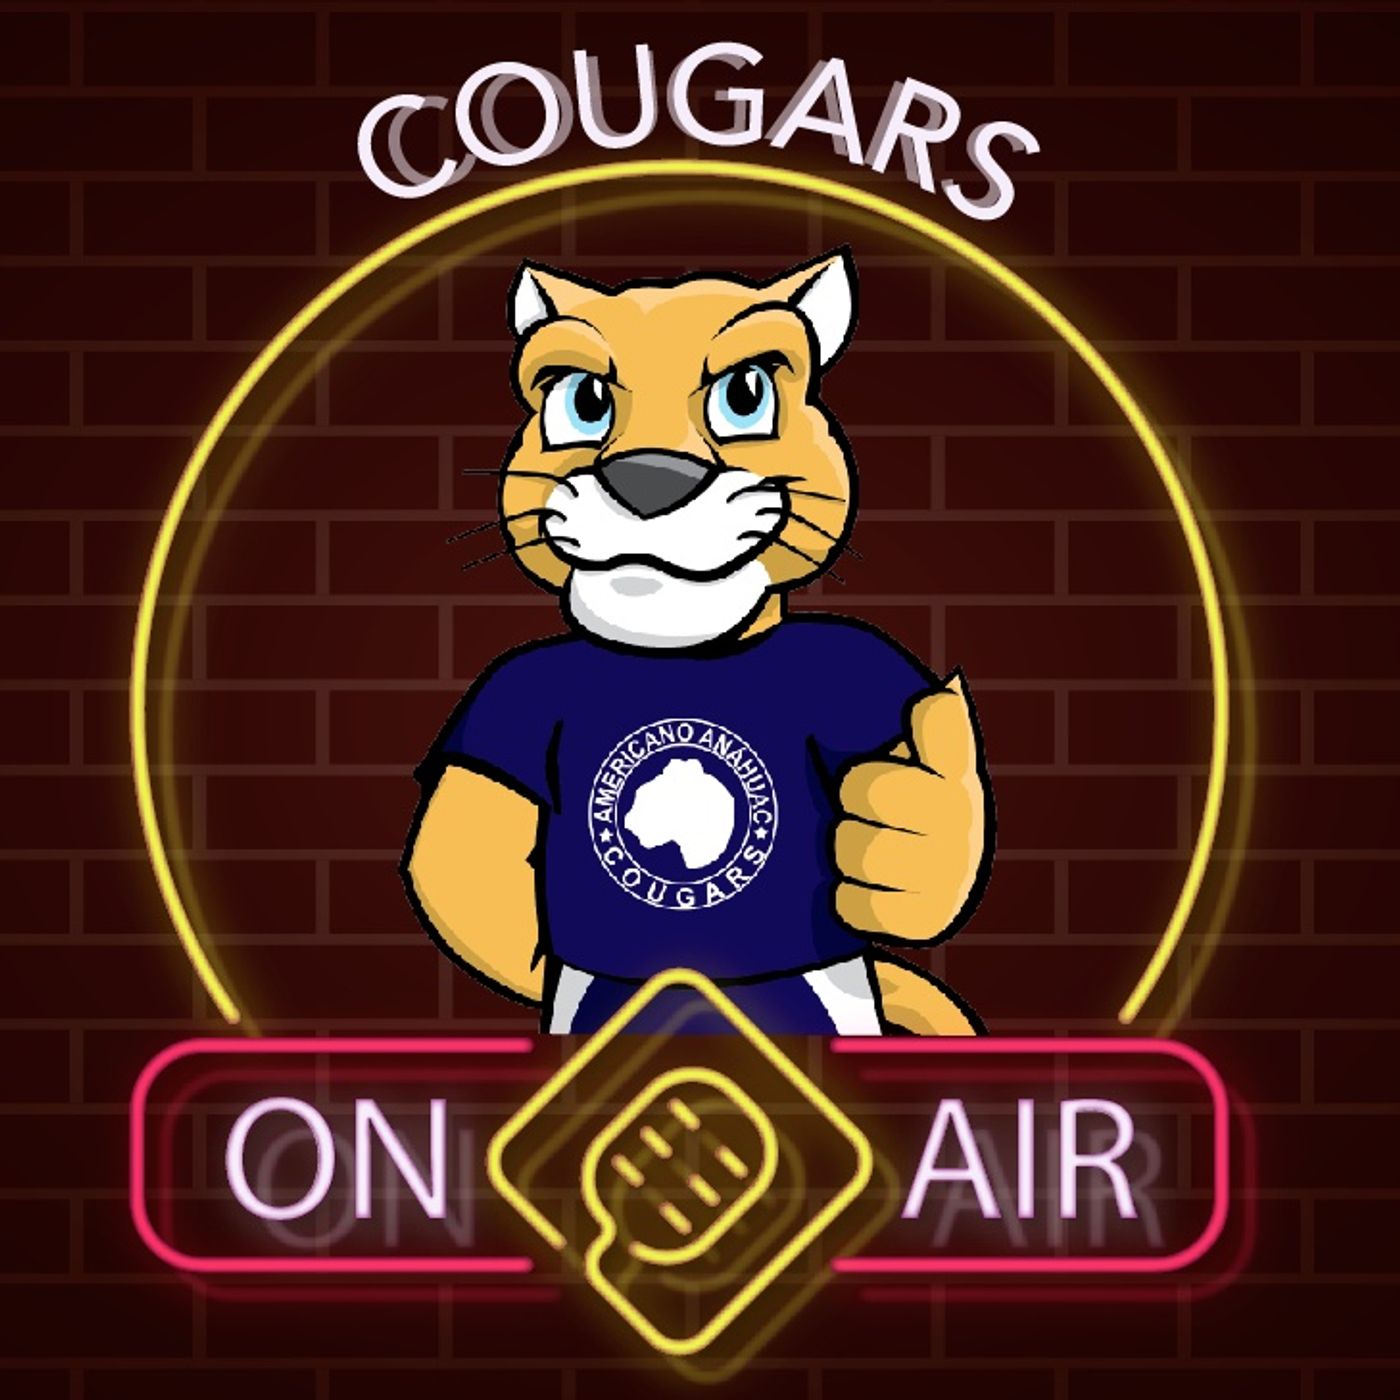 Cougars On Air